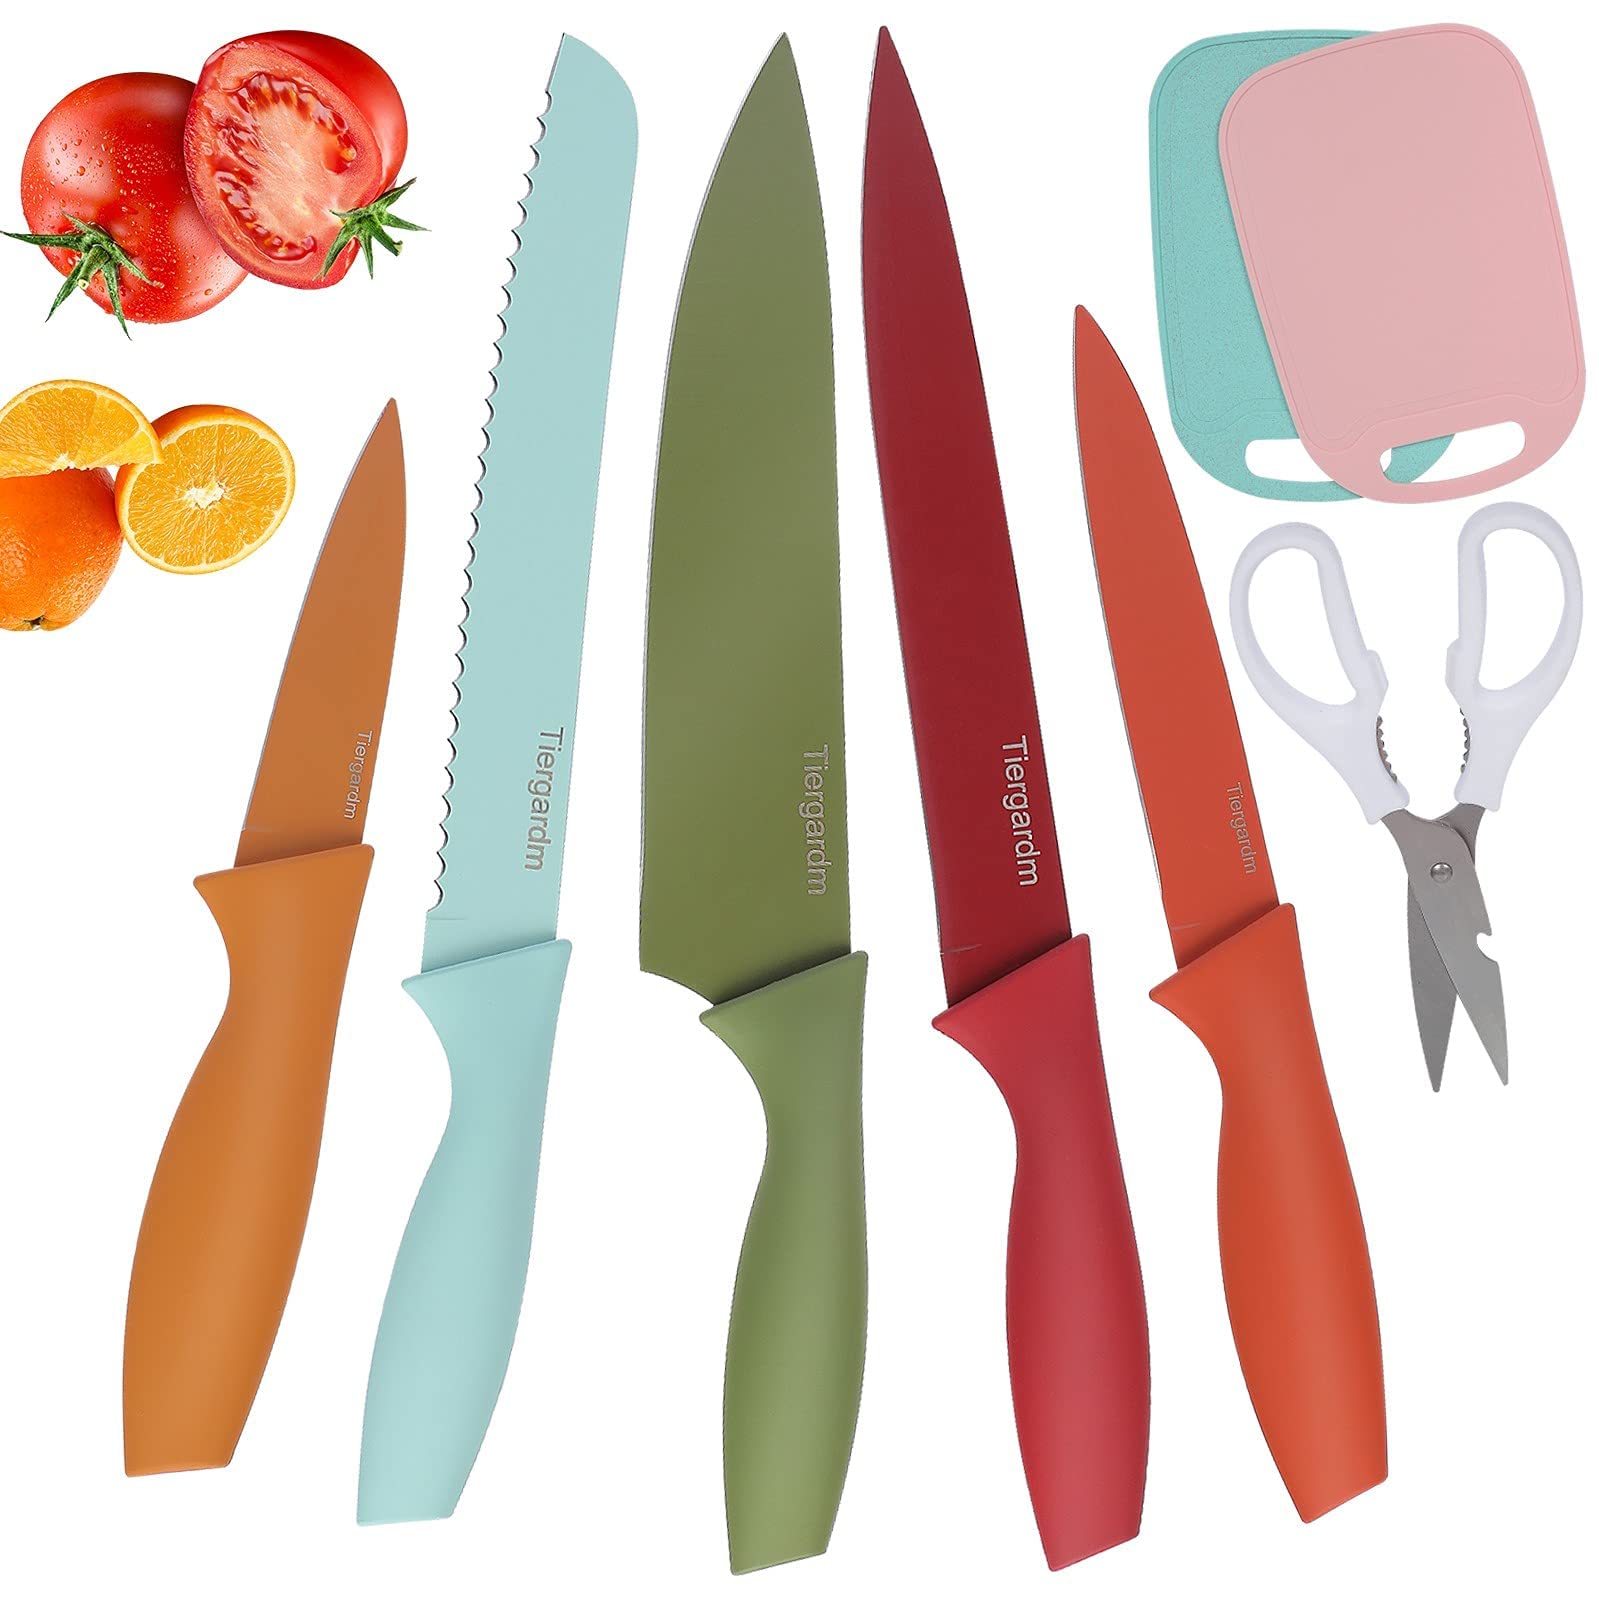 Tiergardm 8 Pcs Knife Sets 8'' Chef's Knife 8'' Bread Knife 8'' Slicer Knife 5'' Utility Knife 3.5'' Paring Knife 3.2'' Kitchen Shears and 2 Cutting Mats